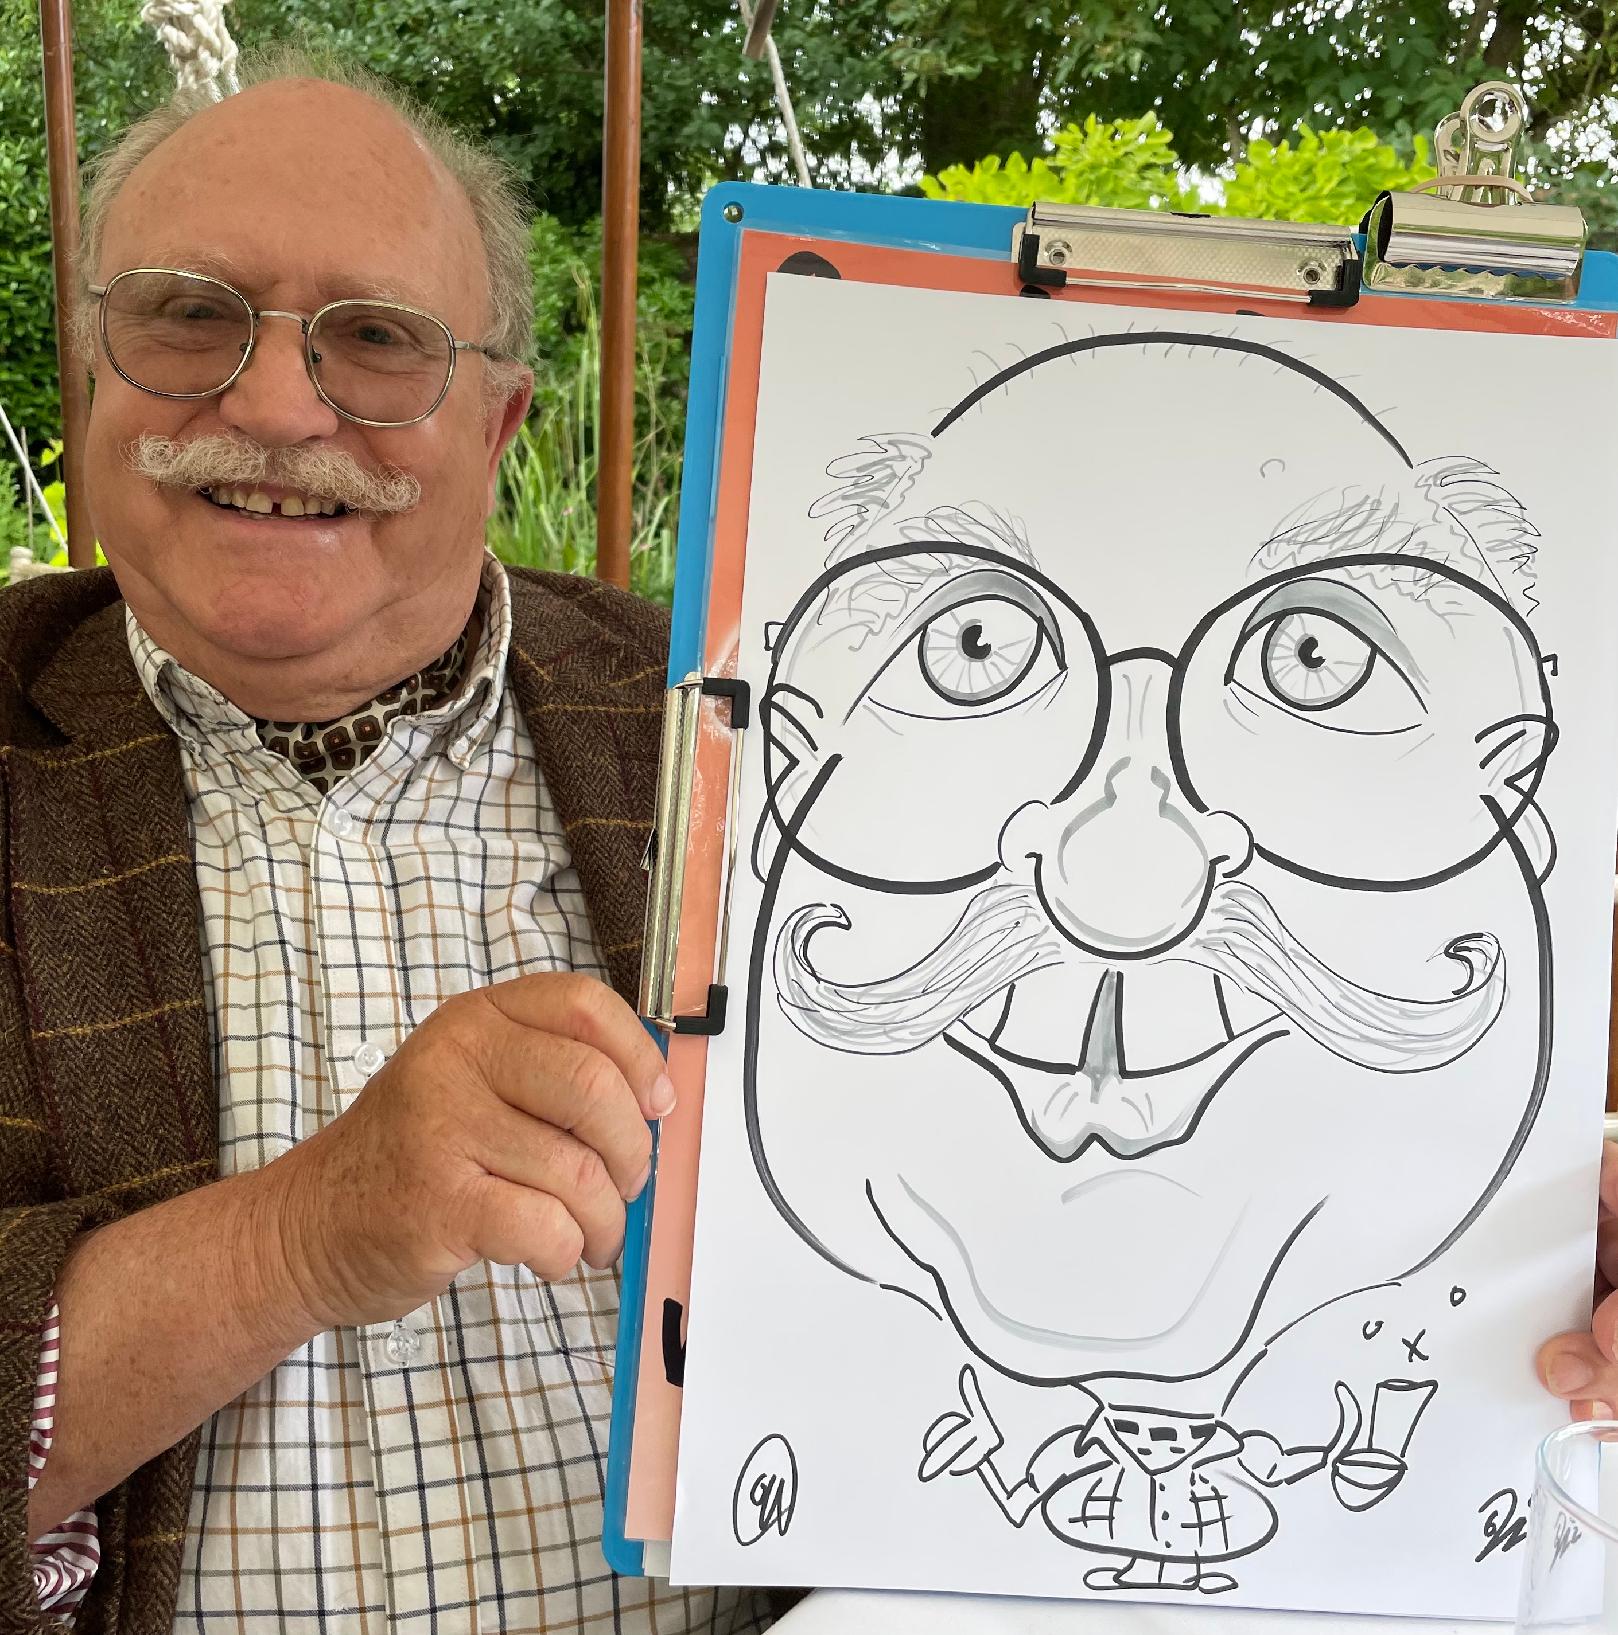 caricatures are great for garden parties or charity events 